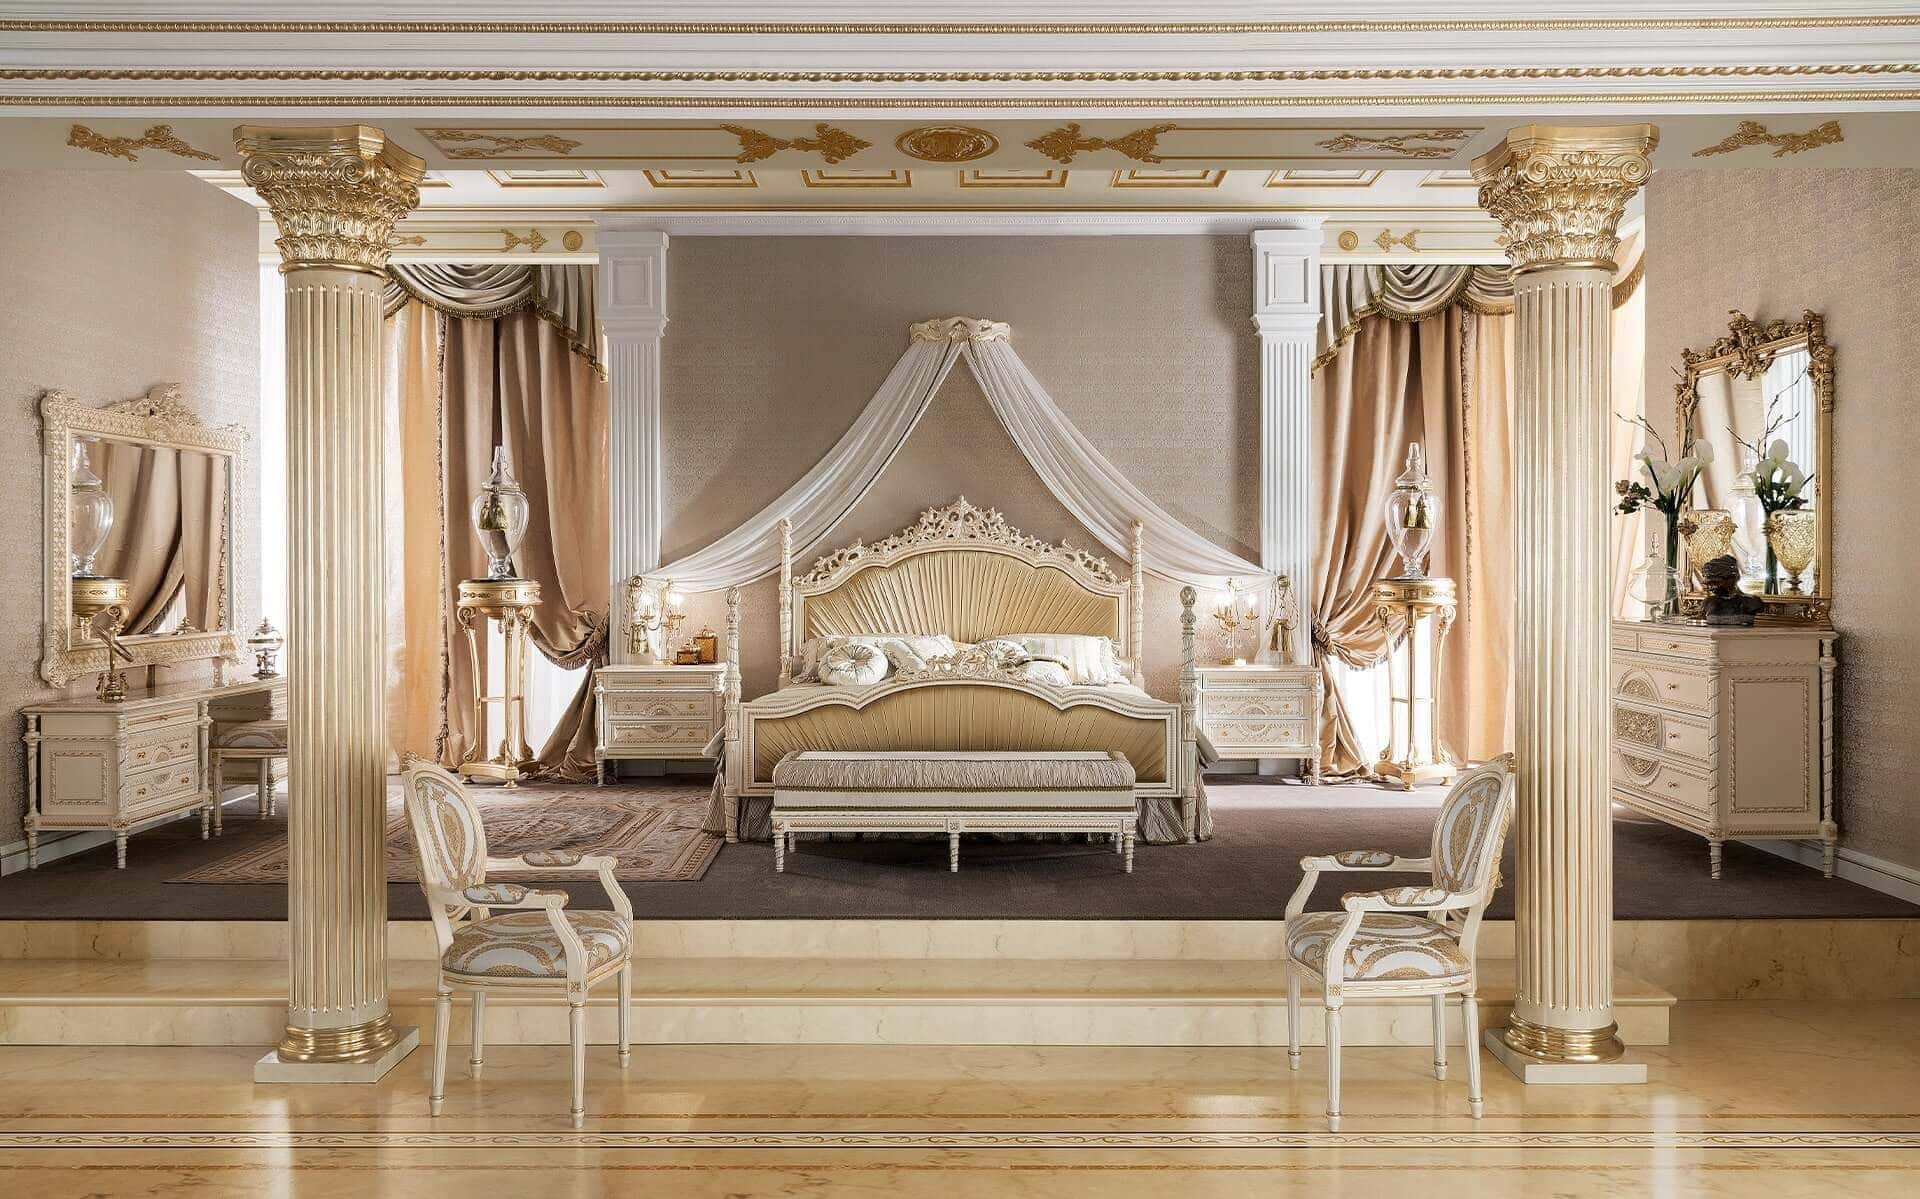 Sophisticated master bedroom in elegant empire style, best Italian design and furniture manufacturer. Elegant handmade details, pearled ivory finish, bespoke classic furniture for the most refined palaces, villas, hotels bedrooms. Solid wood handmade interiors with made in Italy high-end quality and top quality. Traditional victorian venetian rococo' classic style: best classic furniture ideas.